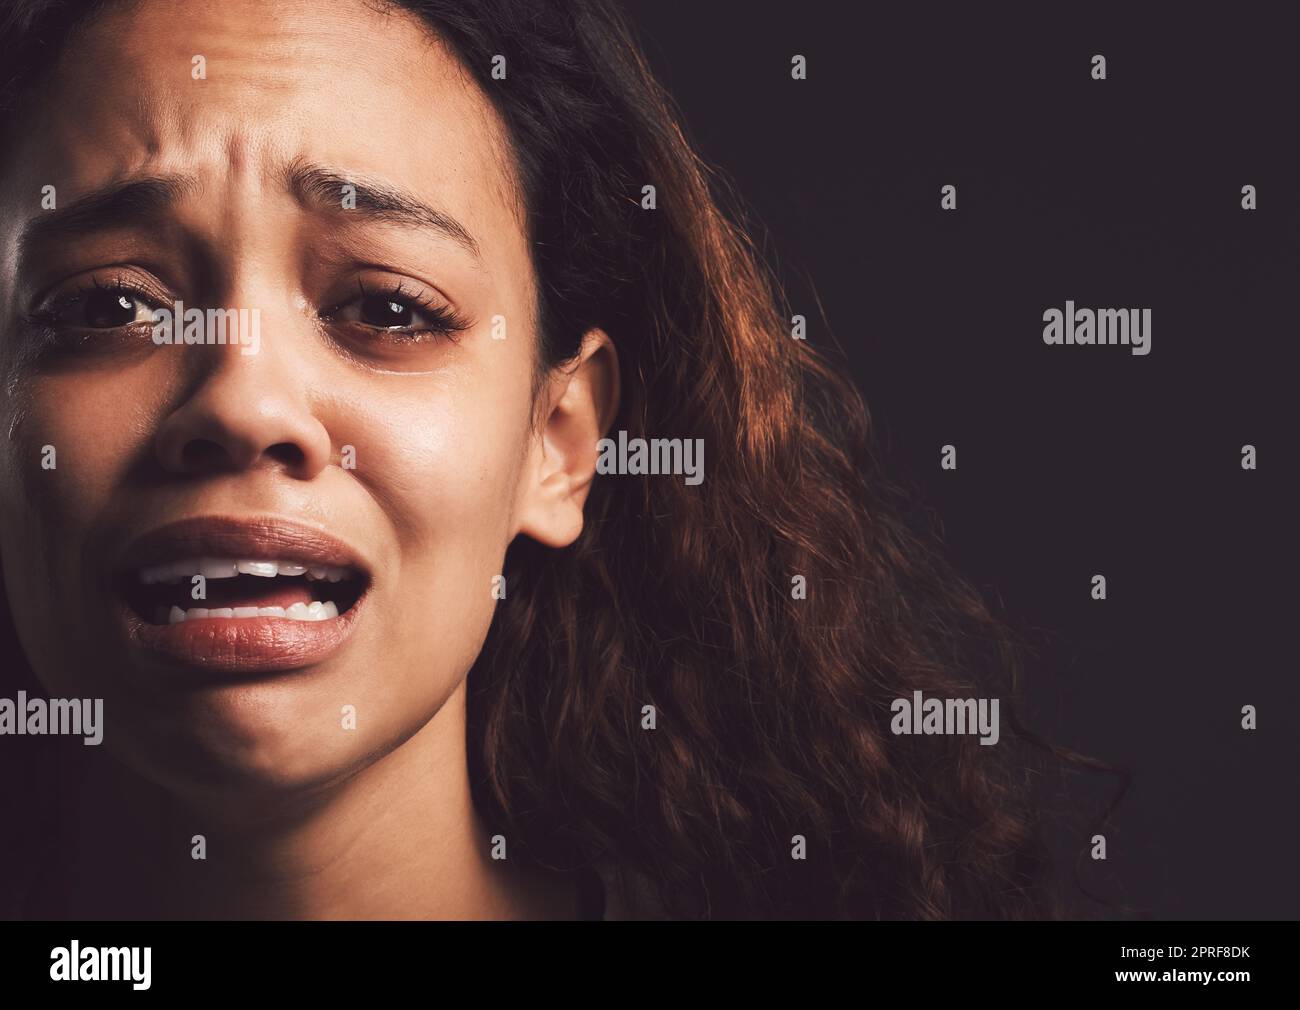 My dark days made me strong. a young woman crying against a black background Stock Photo